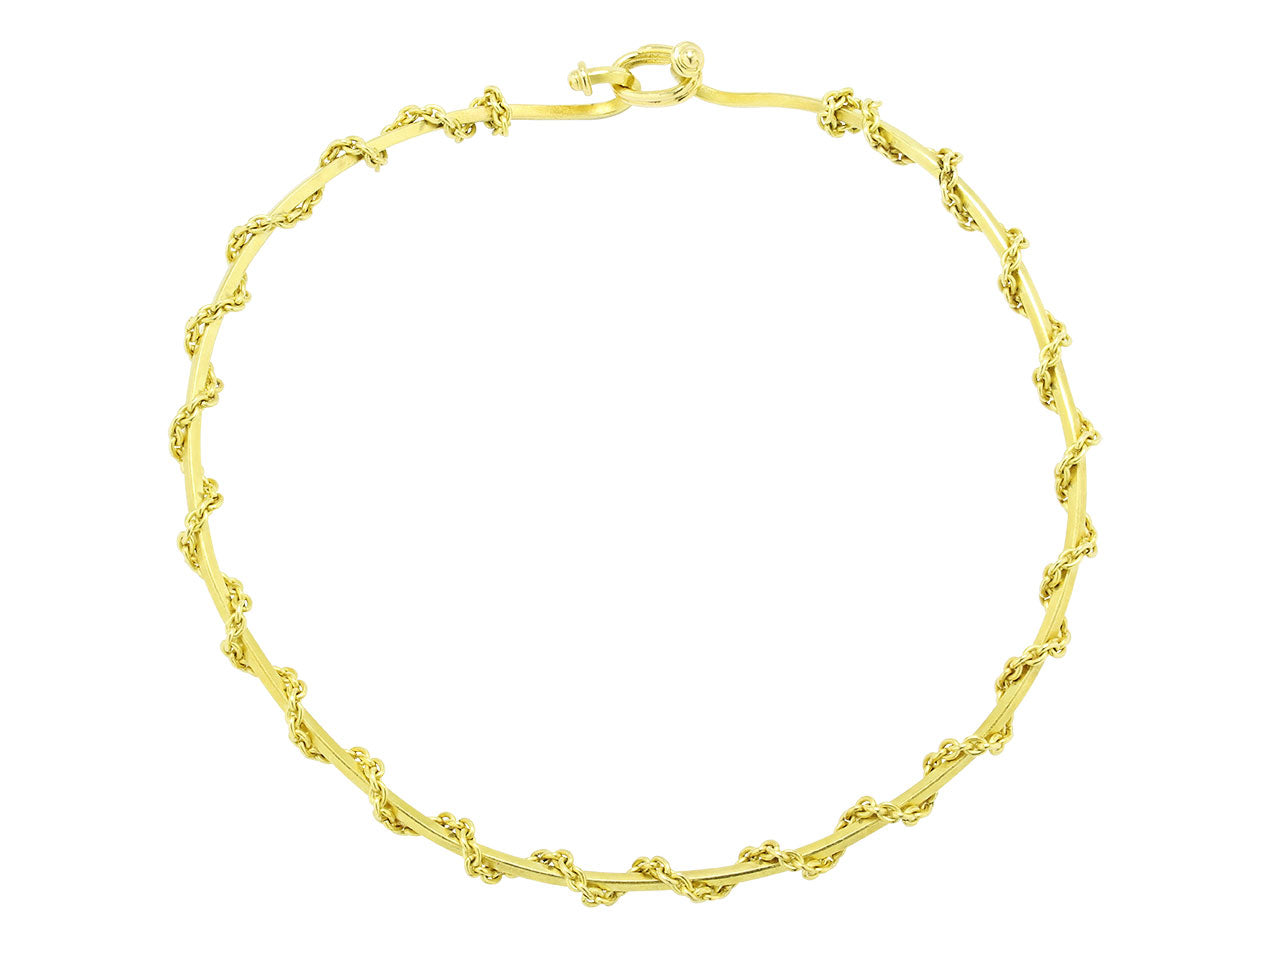 Gold Choker Chain Necklace in 14K Gold